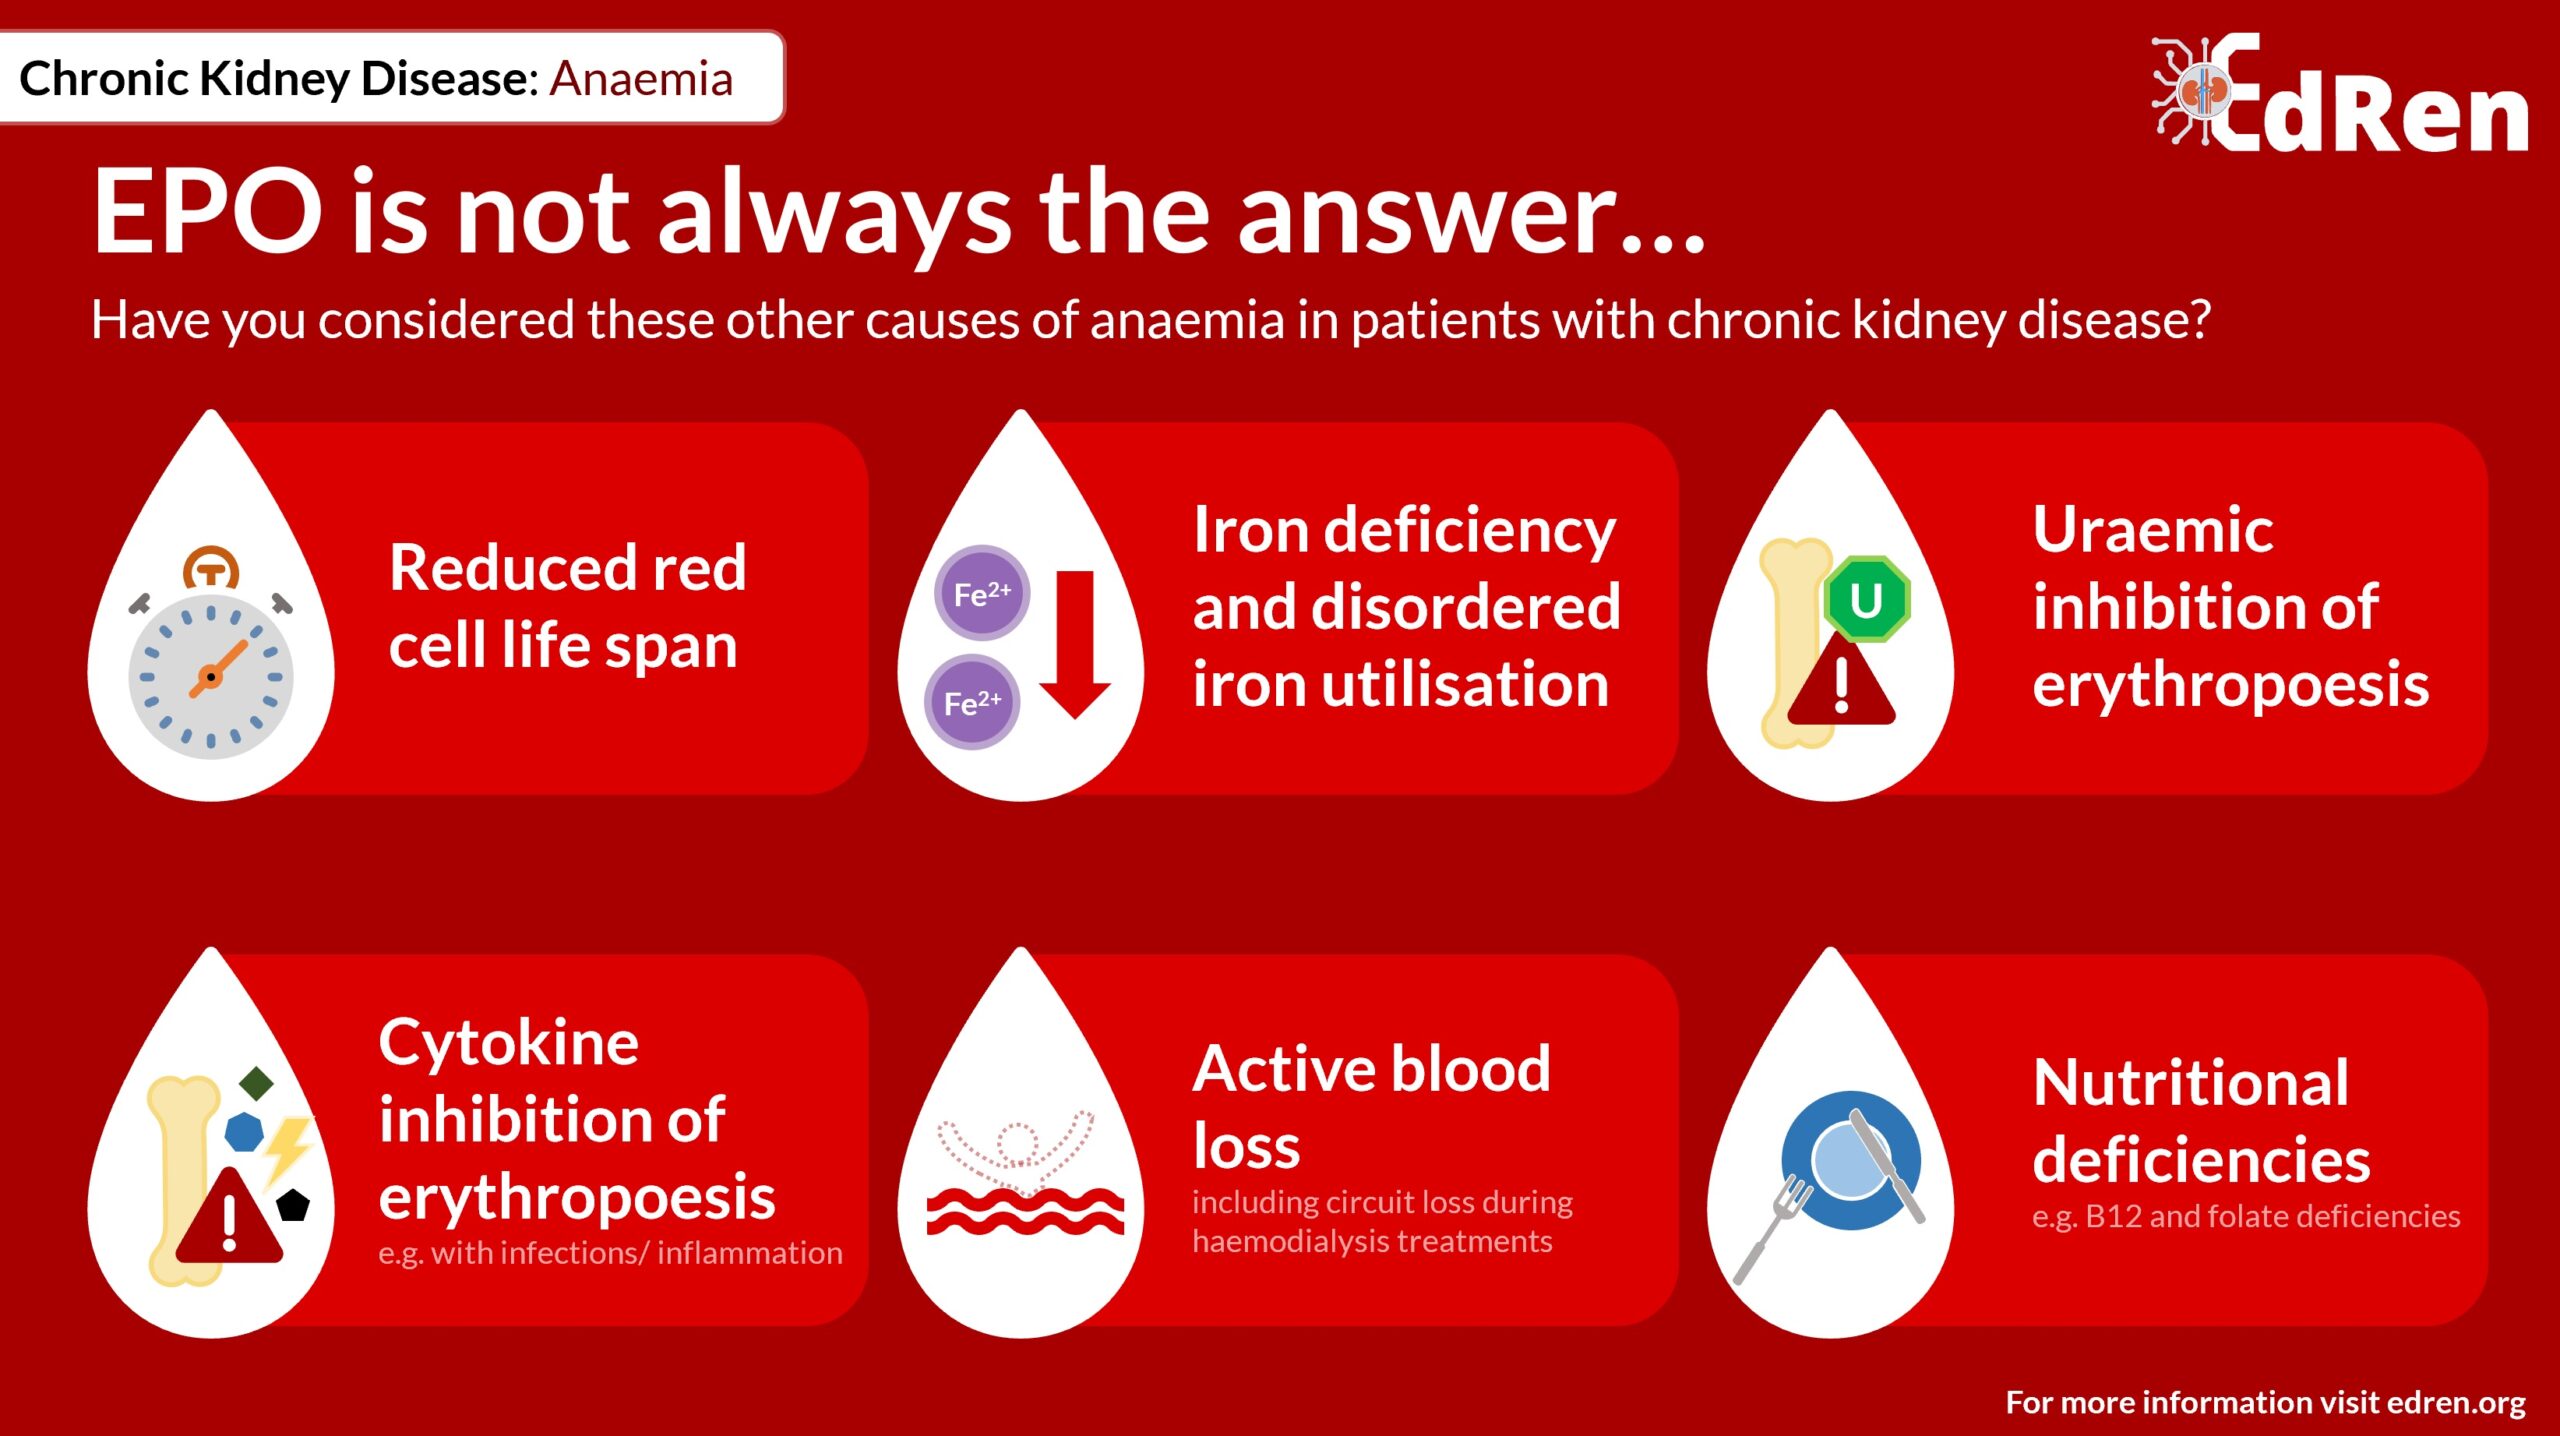 Anaemia in CKD